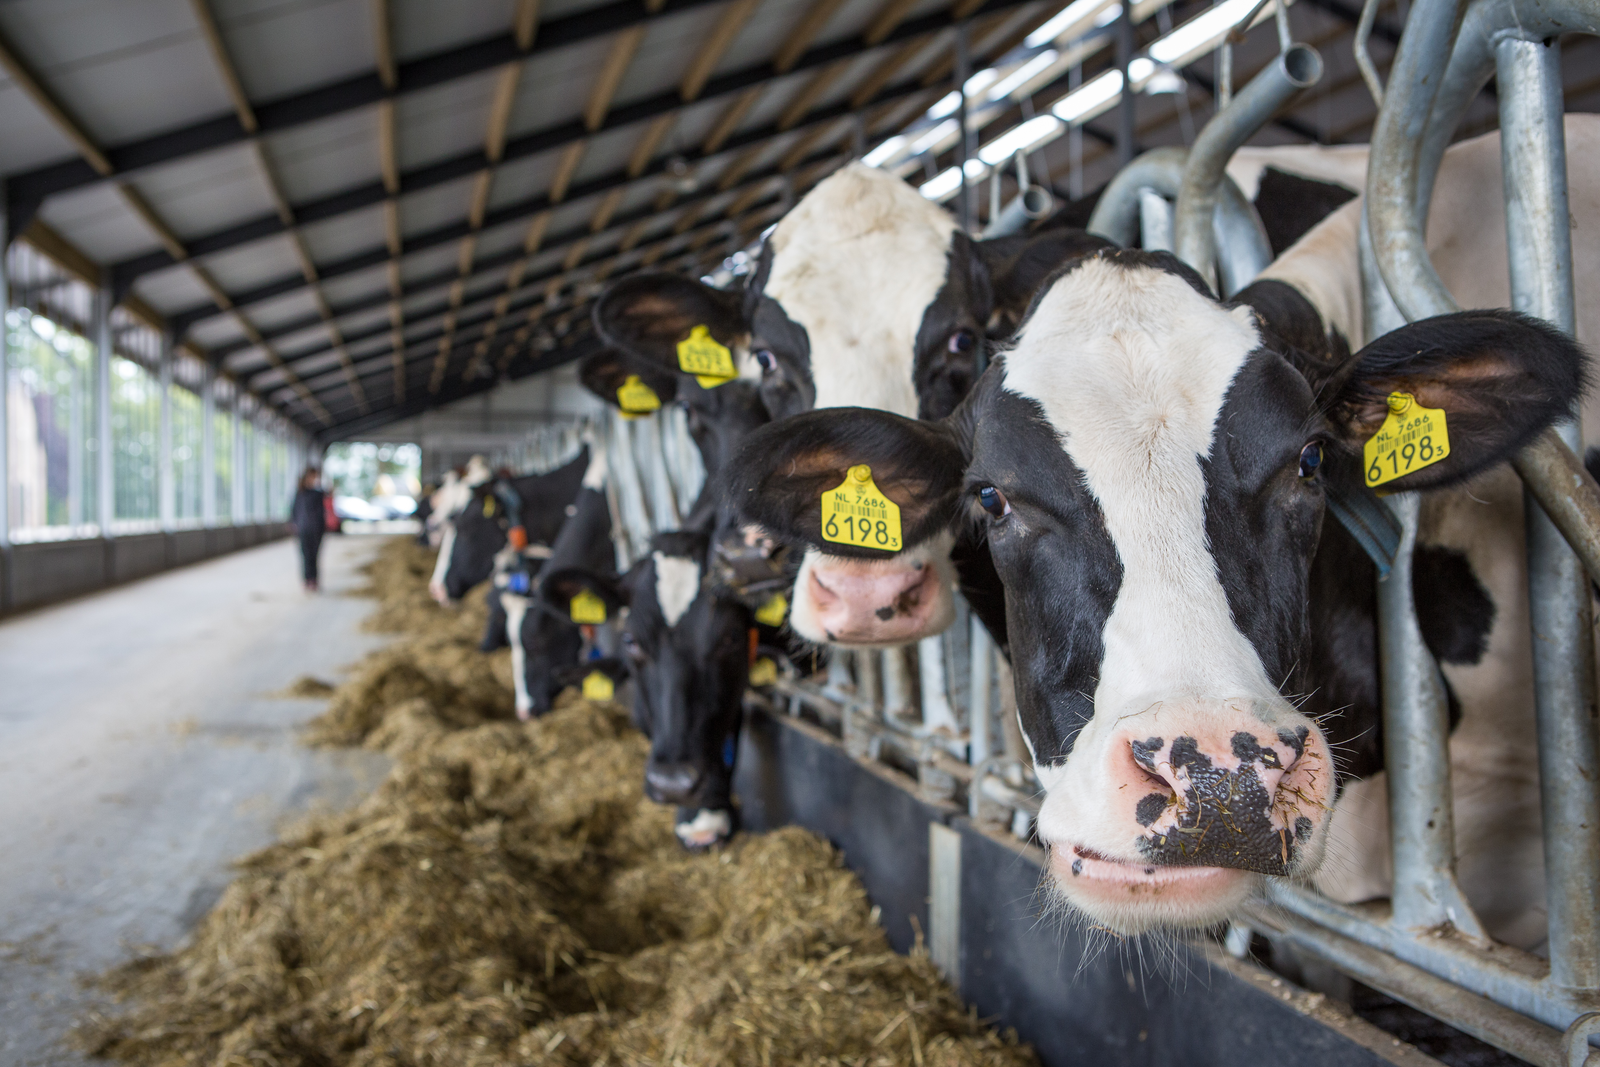 Sweetening anionic salts for dairy cows